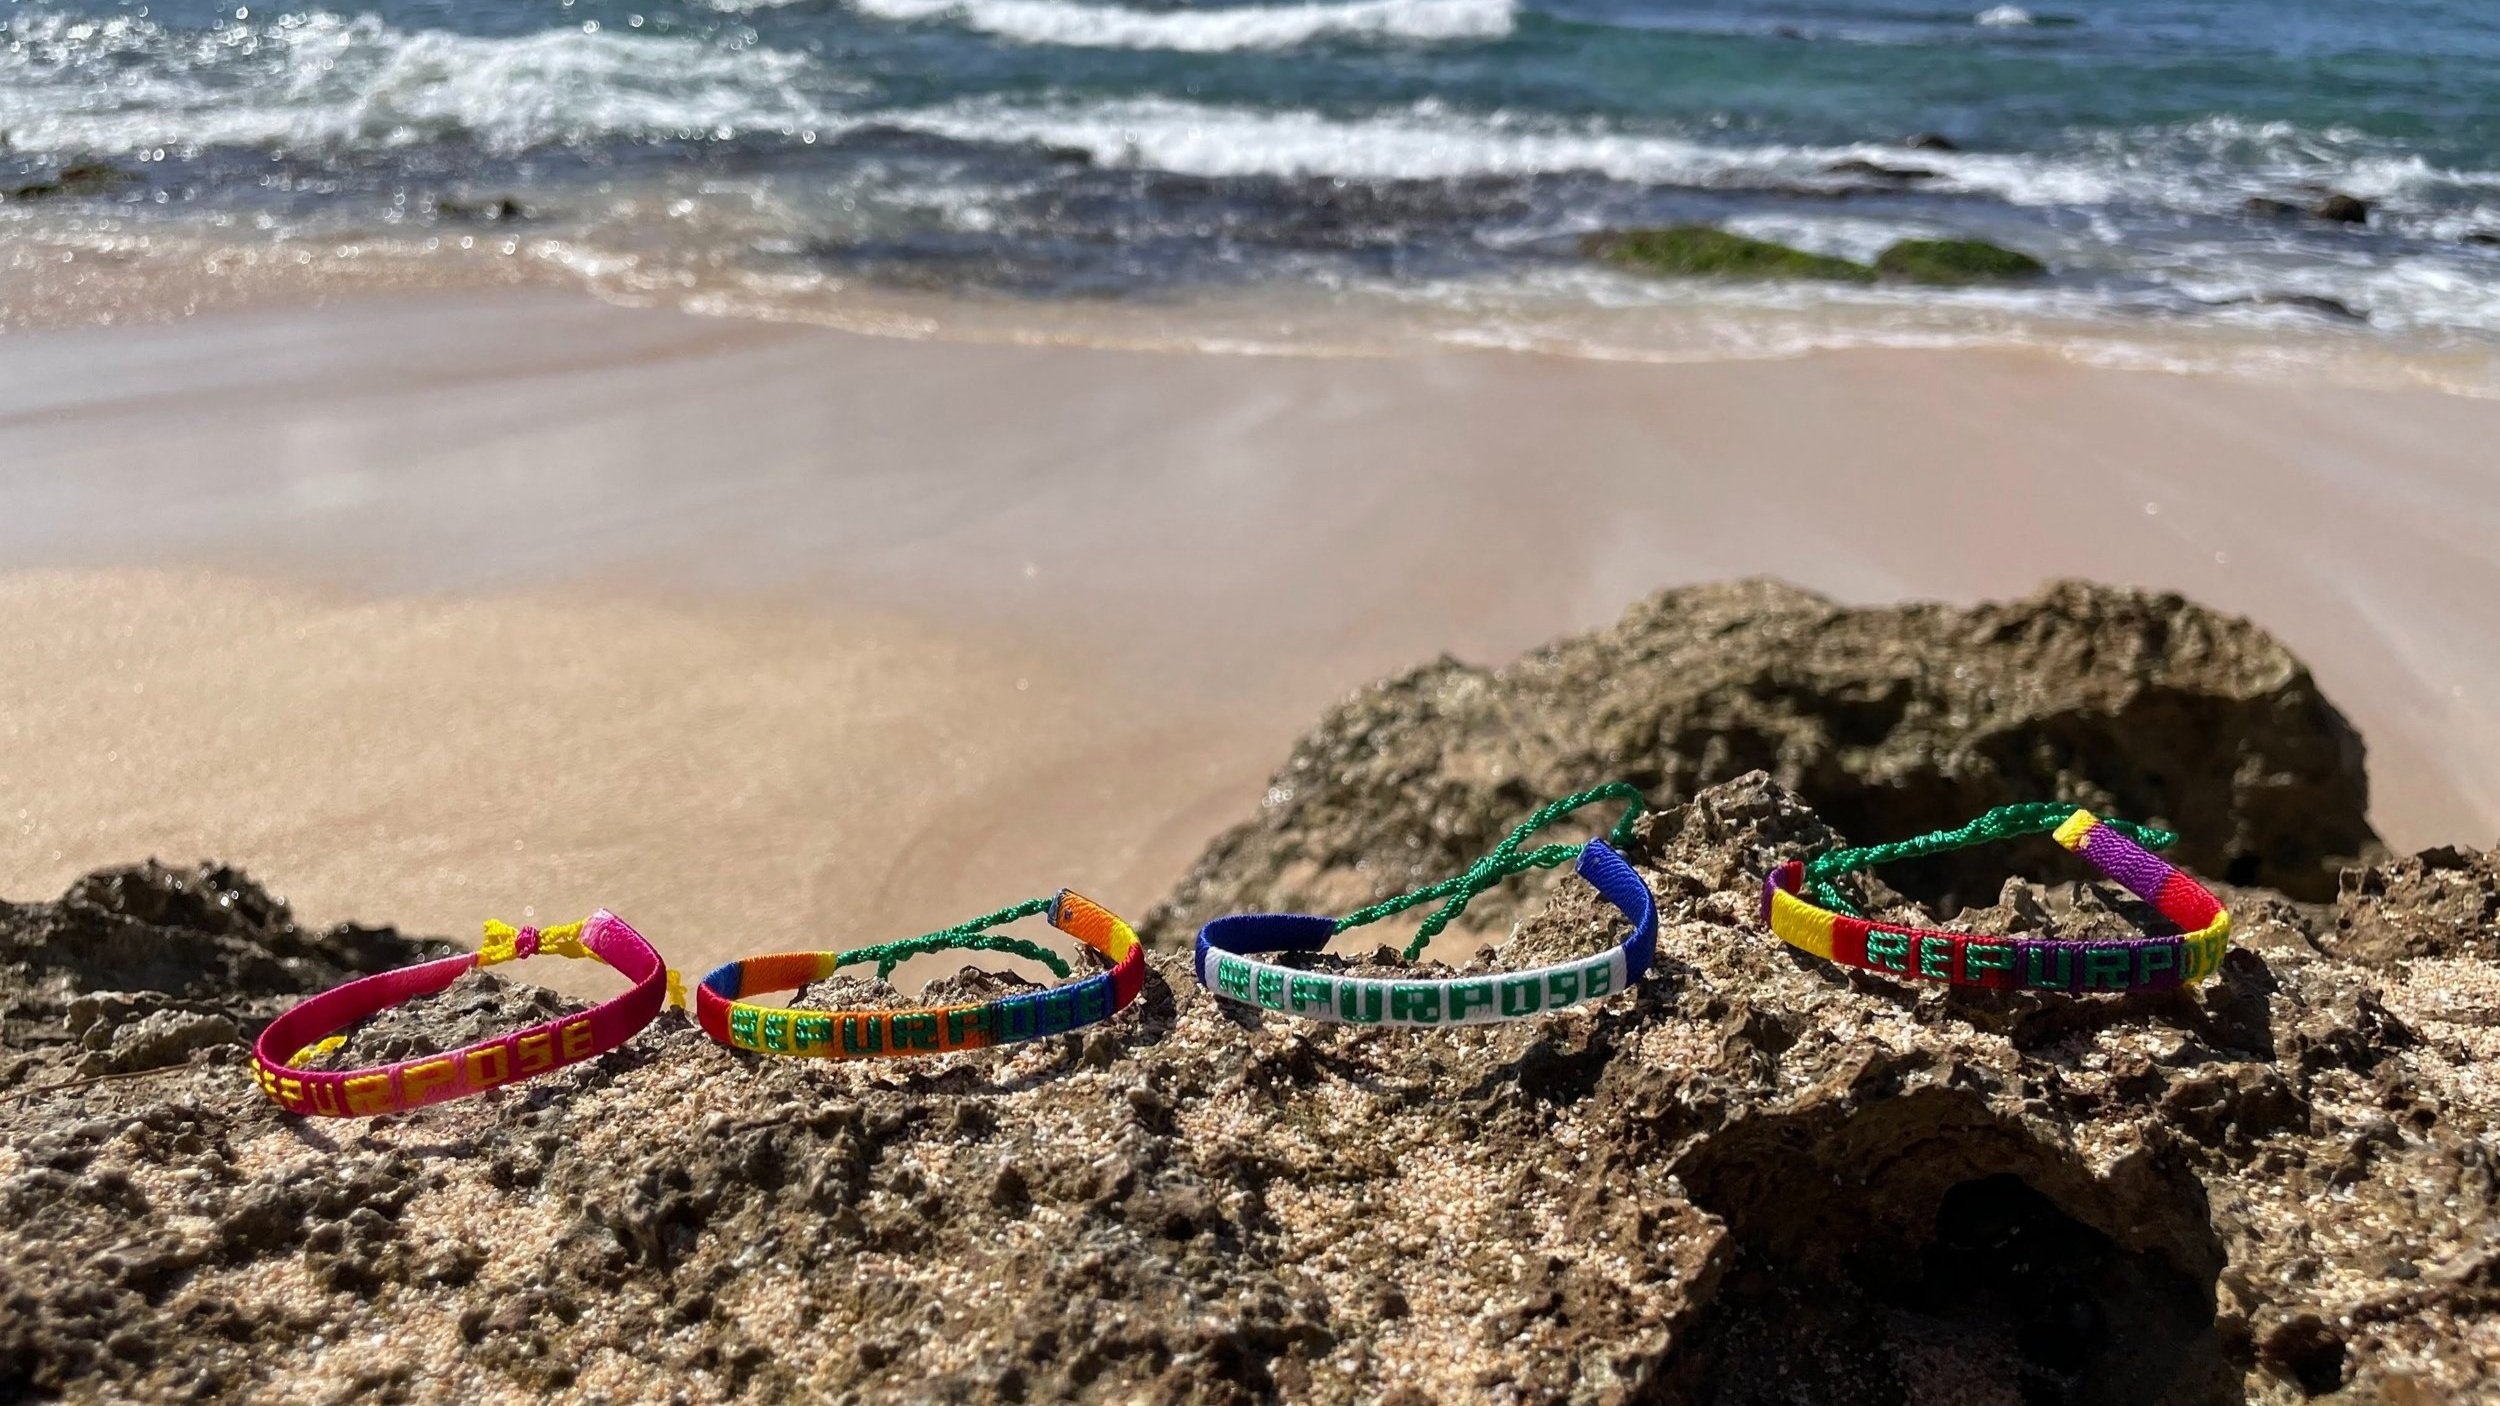   SHOW YOUR SUPPORT   Our hand-crafted bracelets help support our mission.   SHOP NOW  